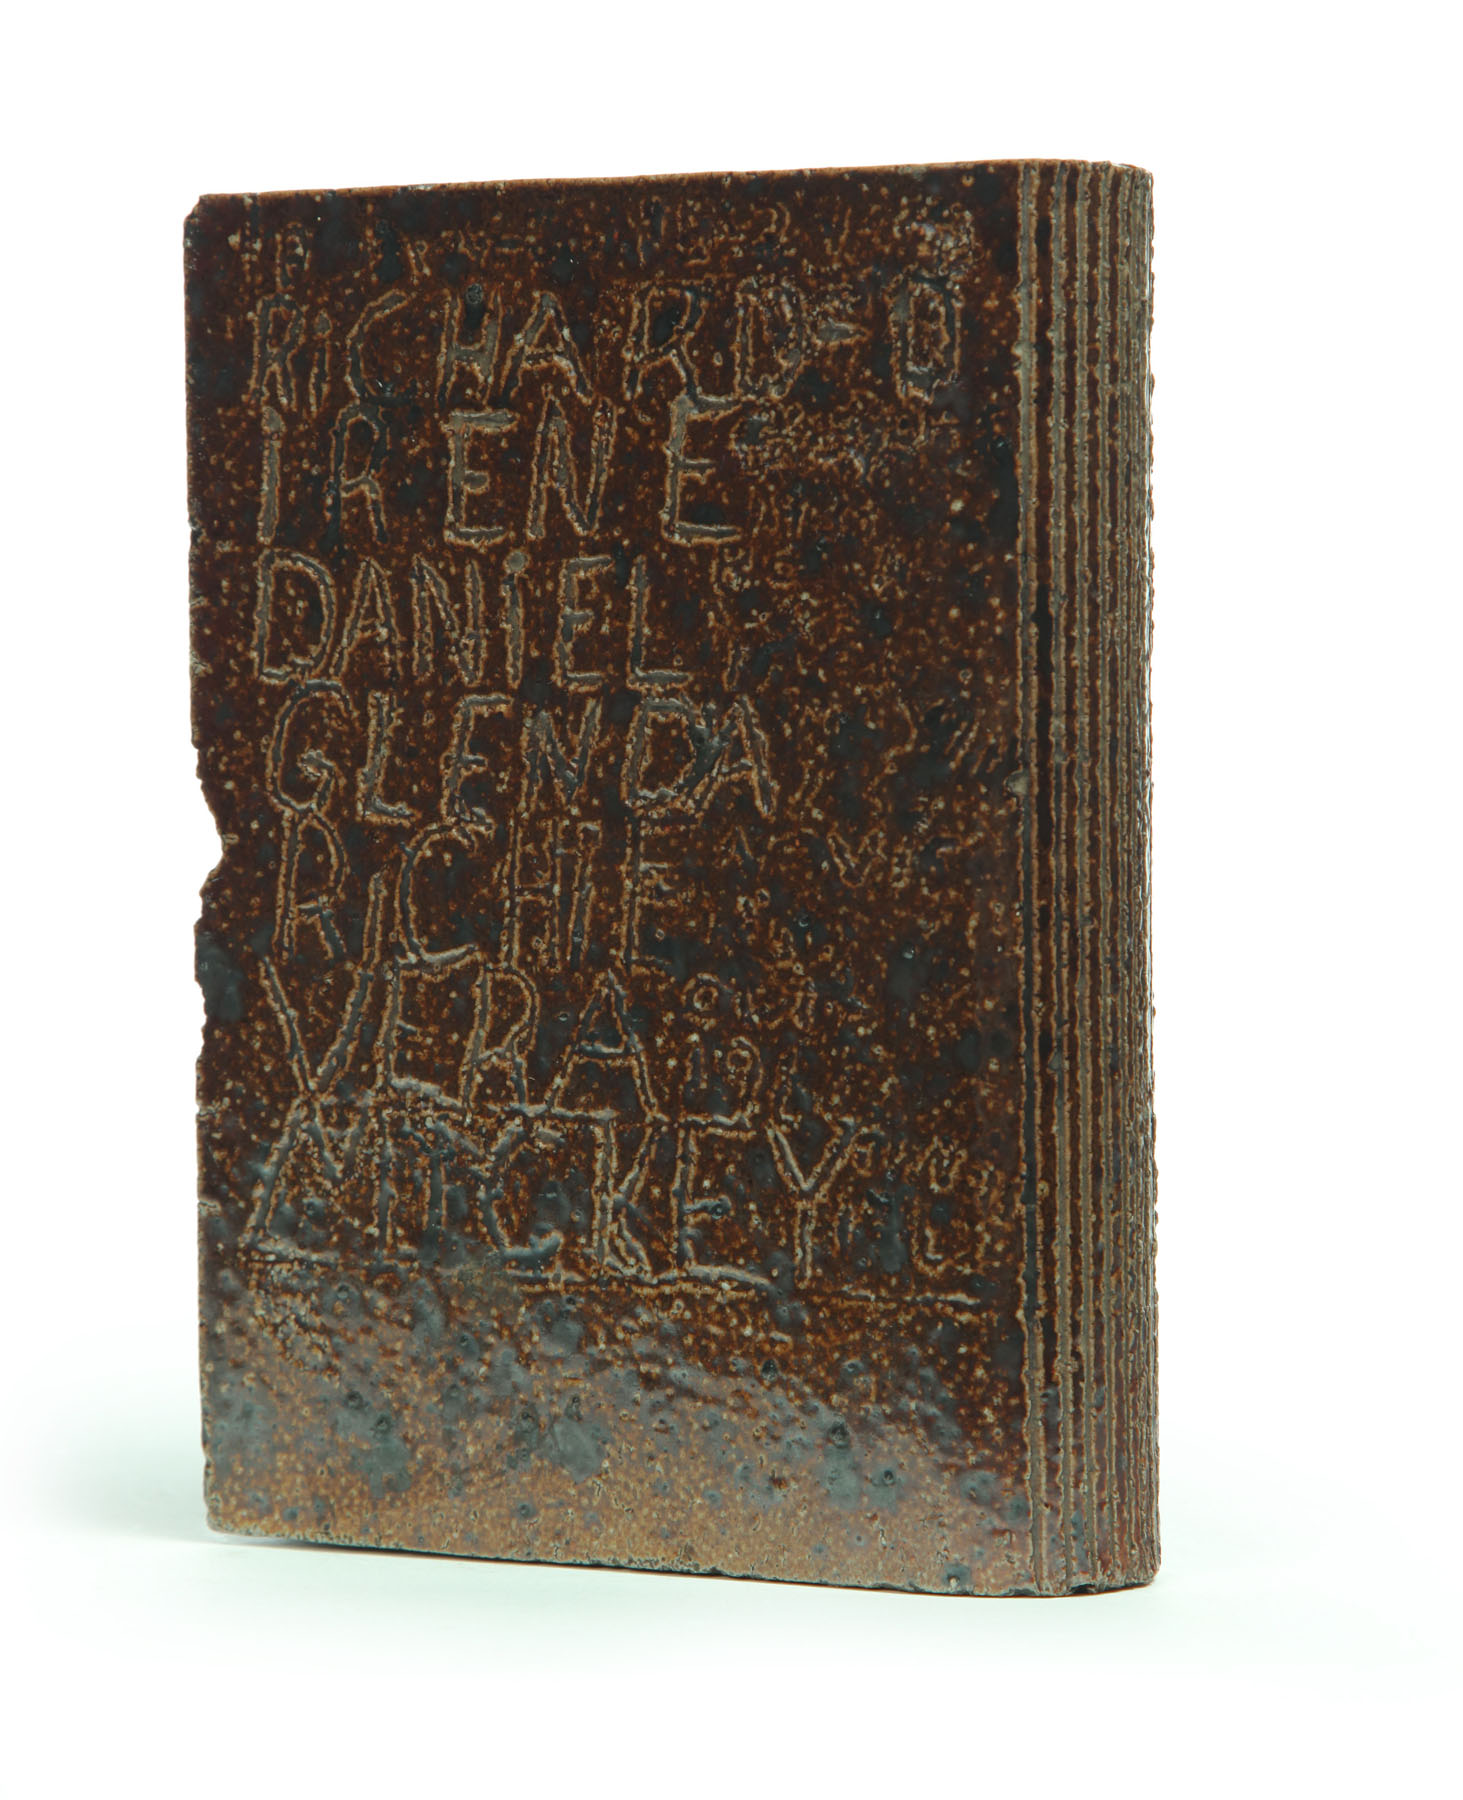 SEWERTILE BOOK Probably Ohio 1238c9